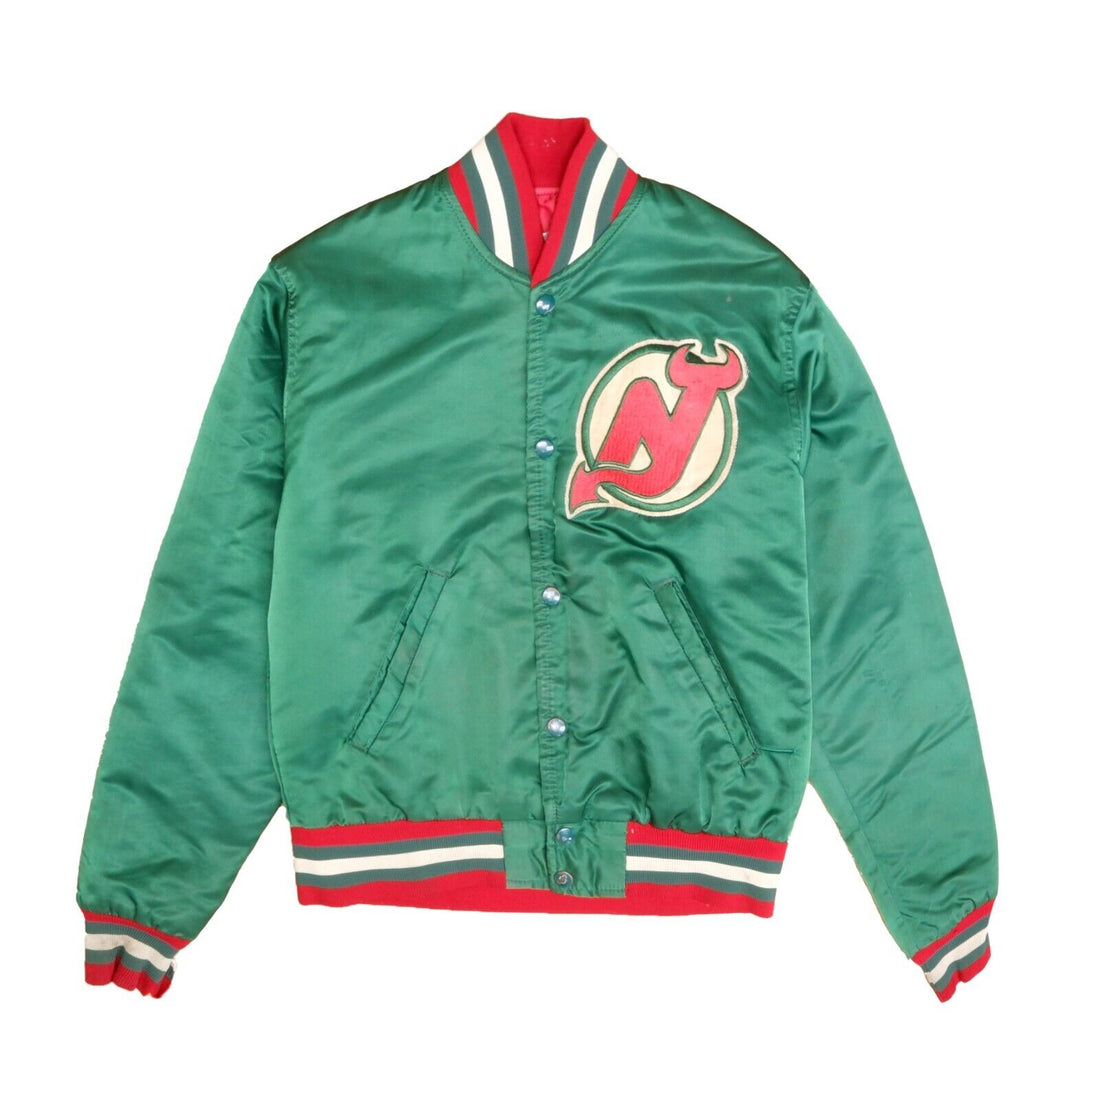 1990s flashback: When the desire for Starter jackets turned deadly